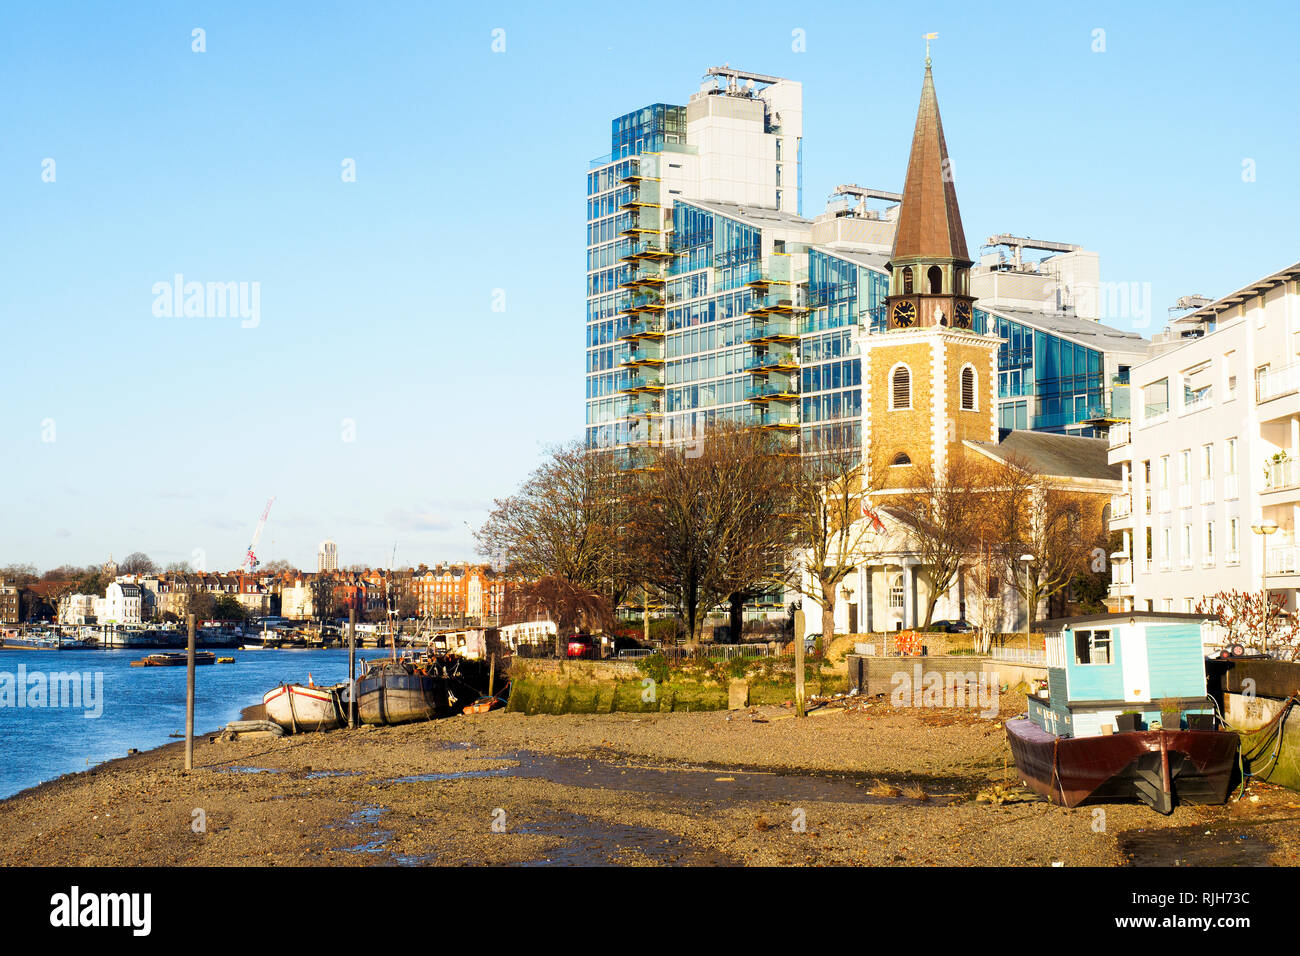 Boats moored at low tide on The River Thames near Saint Mary's Church, Battersea, Wandsworth - South West London, england Stock Photo